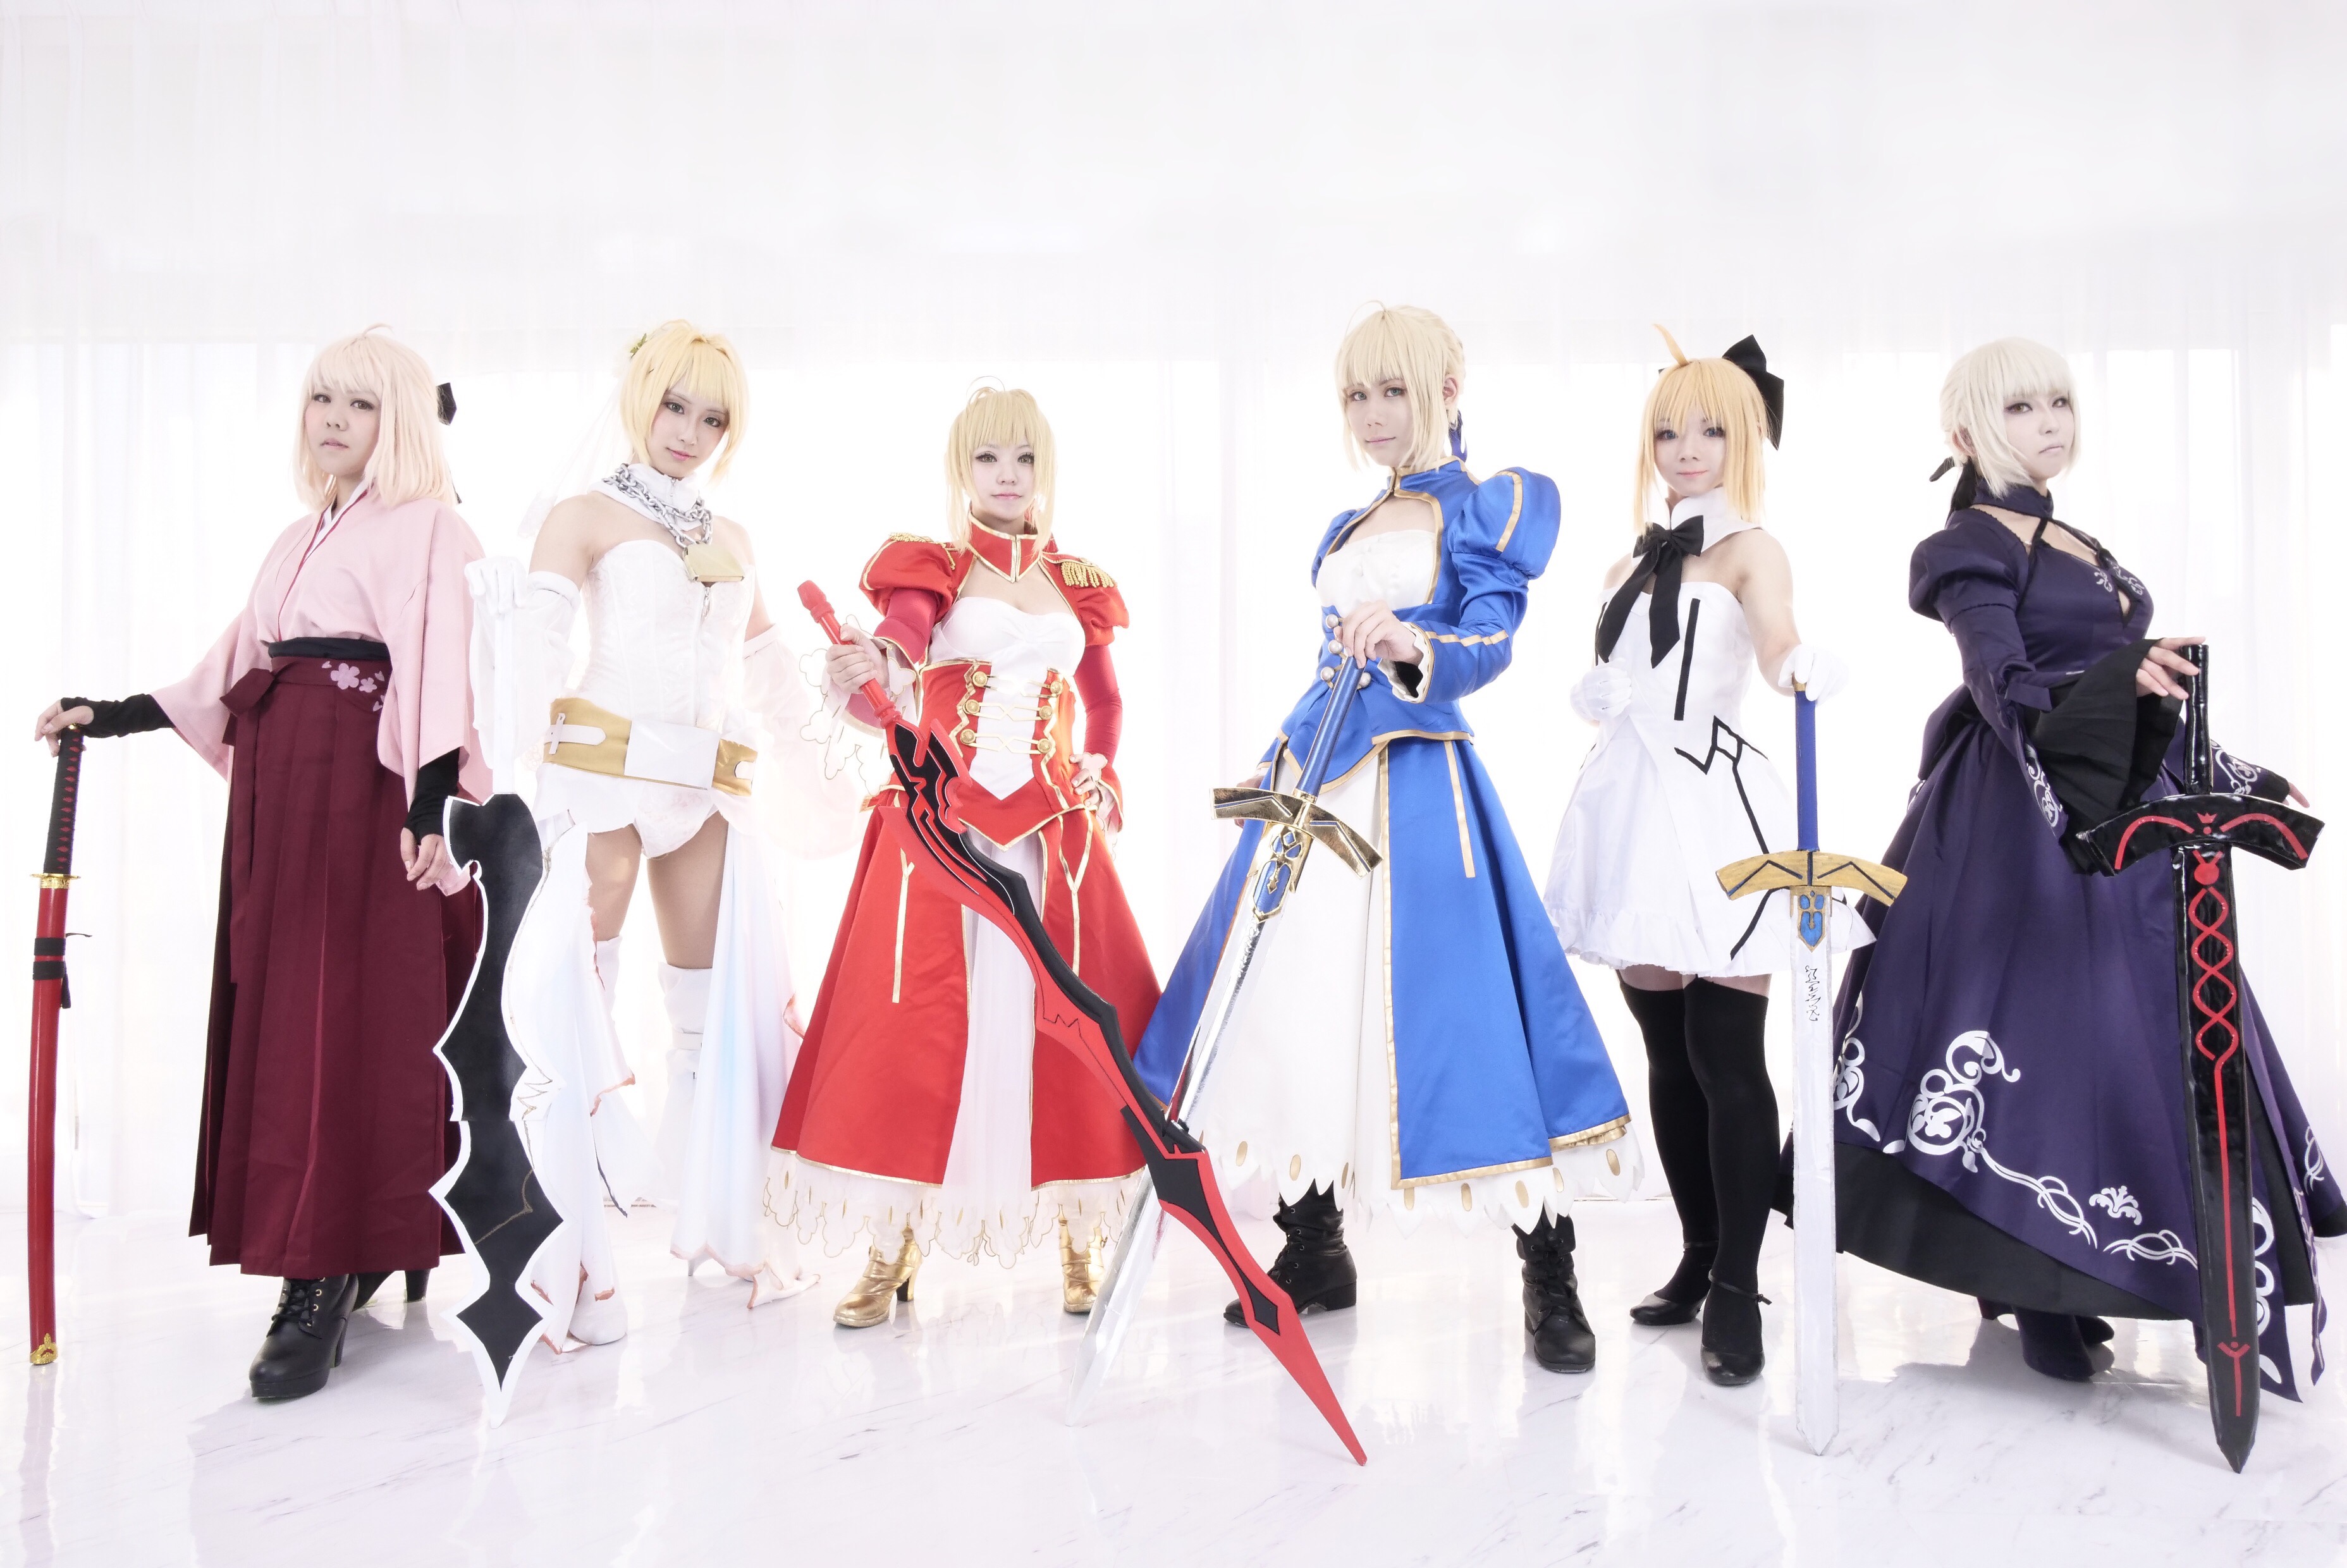 People 3712x2480 Asian Japanese Japanese women women cosplay Fate series Fate/Stay Night fate/stay night: heaven's feel Fate/Extra Fate/Extra CCC Fate/Unlimited Codes  Fate/Grand Order Artoria Pendragon Nero Claudius Okita Souji Saber Saber Alter Saber Bride Saber Lily Excalibur blonde long hair